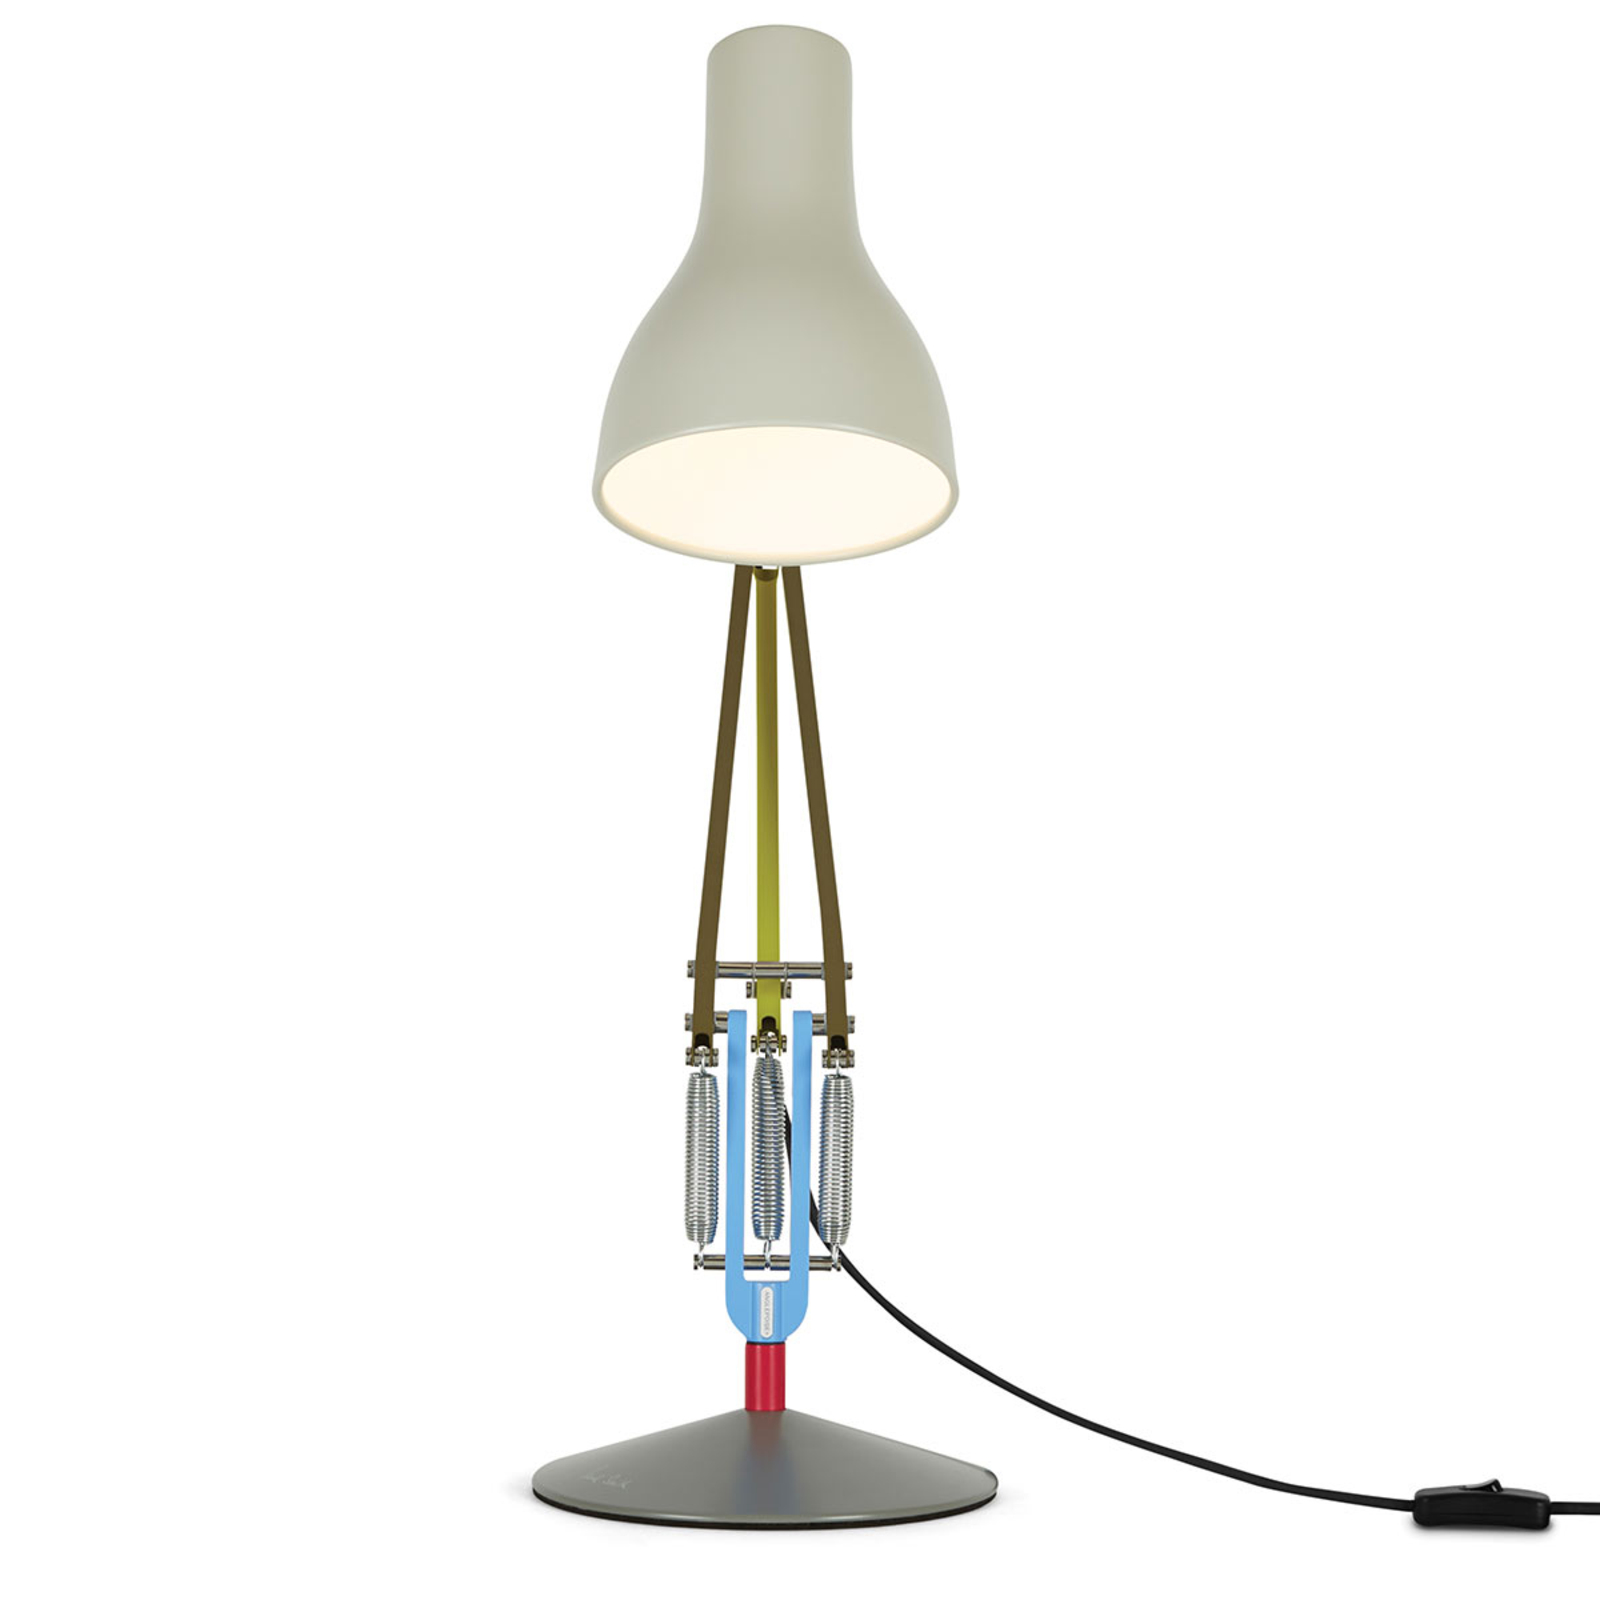 Anglepoise Type 75 table lamp Paul Smith Edition 1